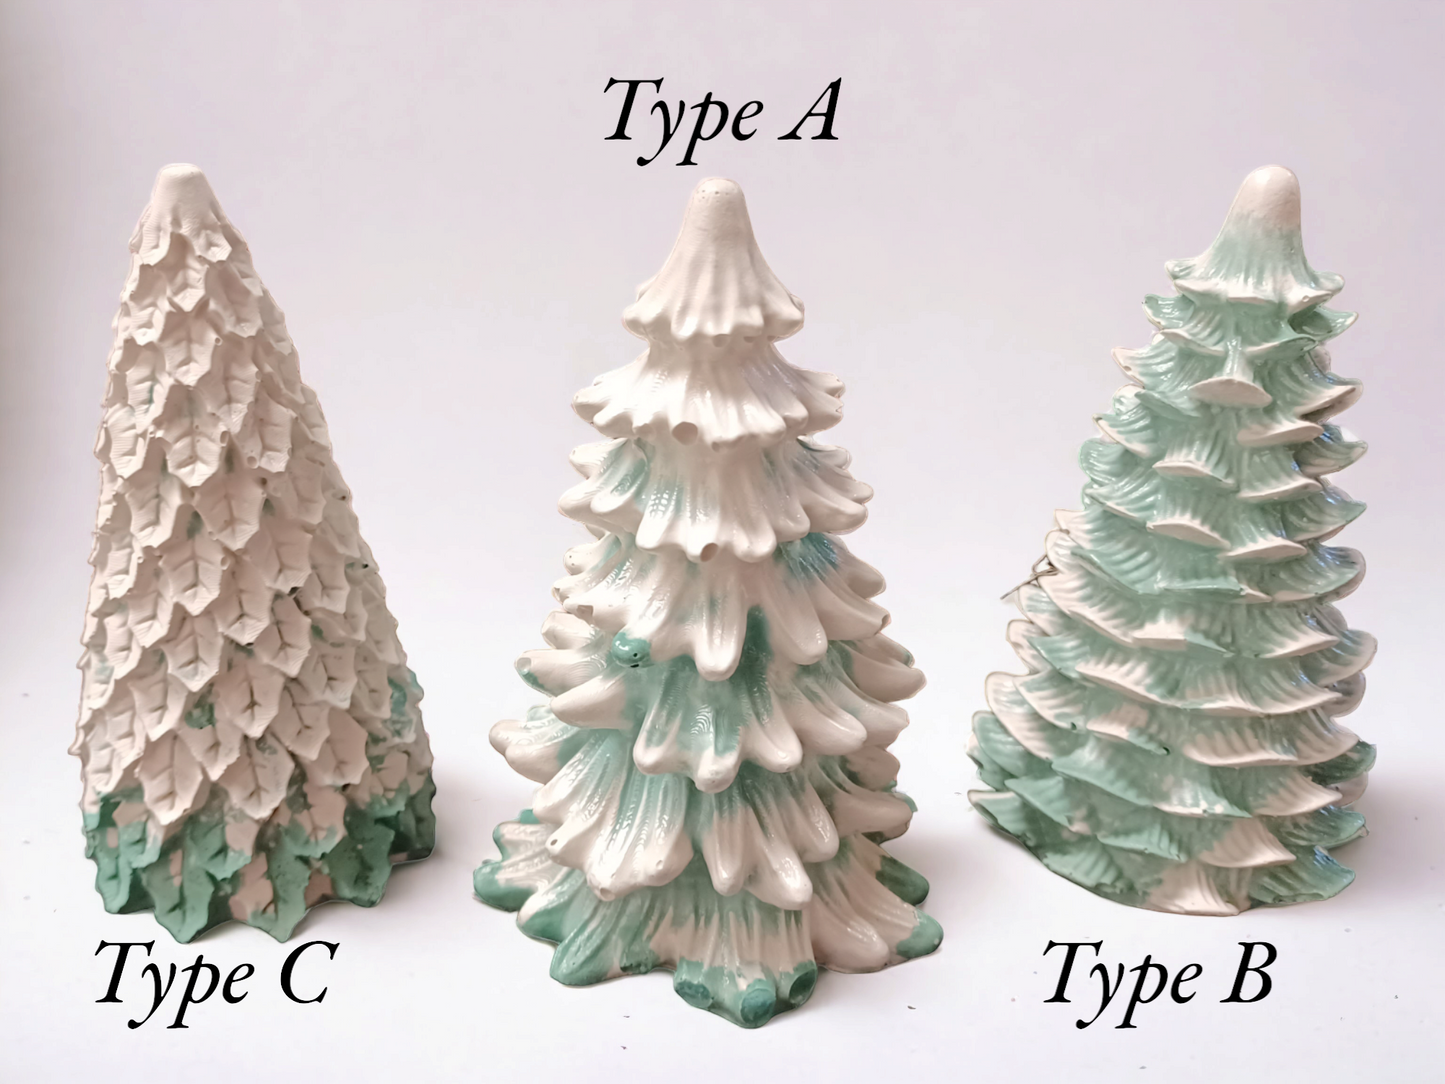 The "Holiday Pine" Handmade, Cement, Rustic Decorative Holiday Tree (Type B)